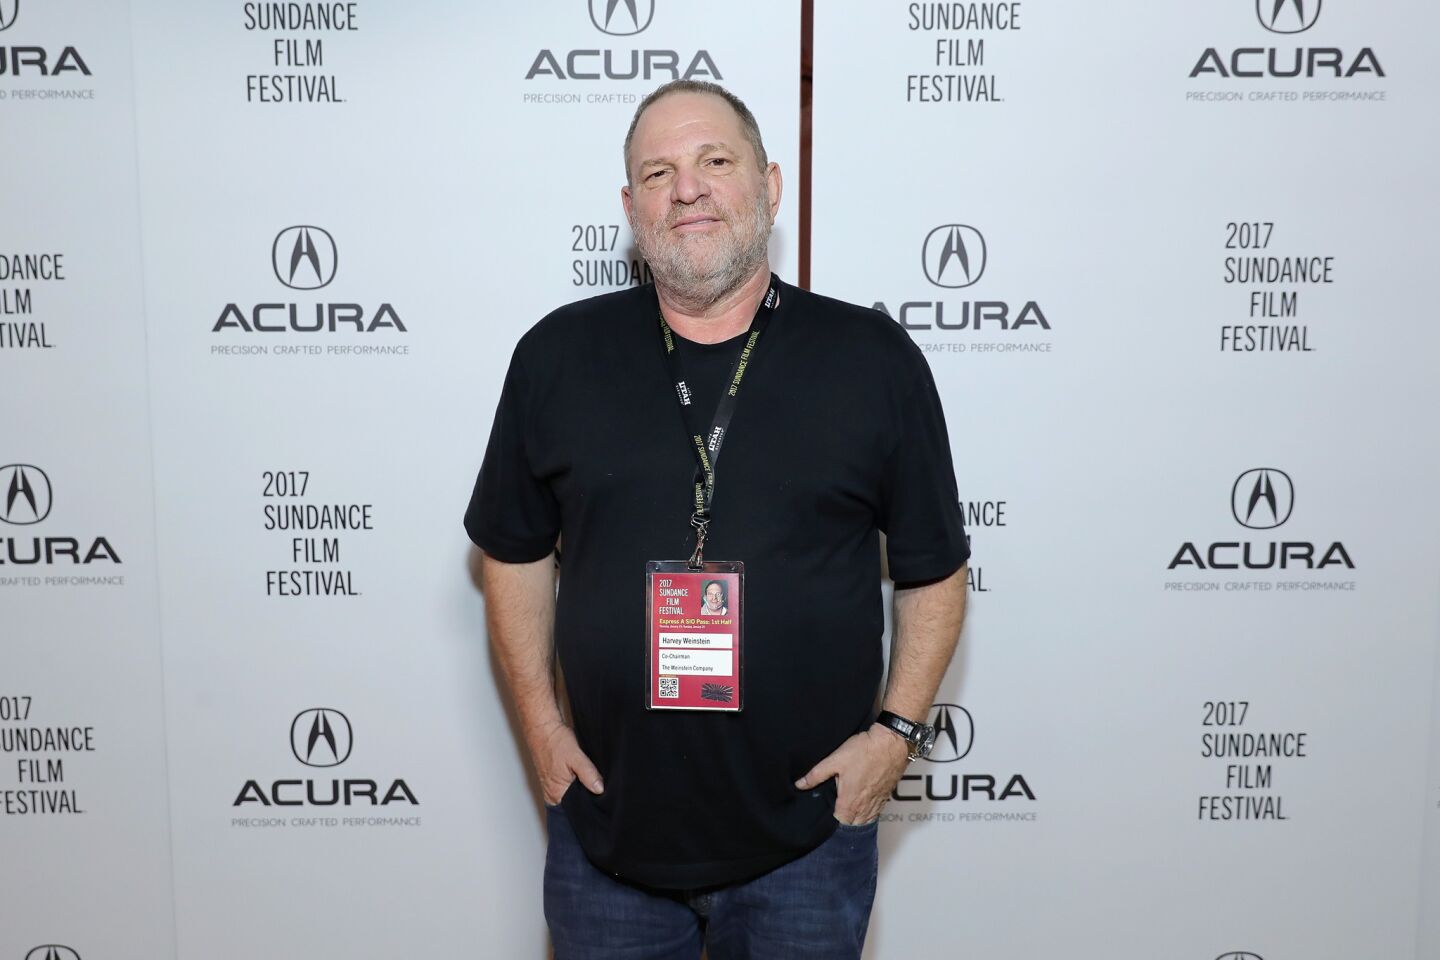 Harvey Weinstein attends the "Wind River" party at the Acura Studio at Sundance Film Festival.